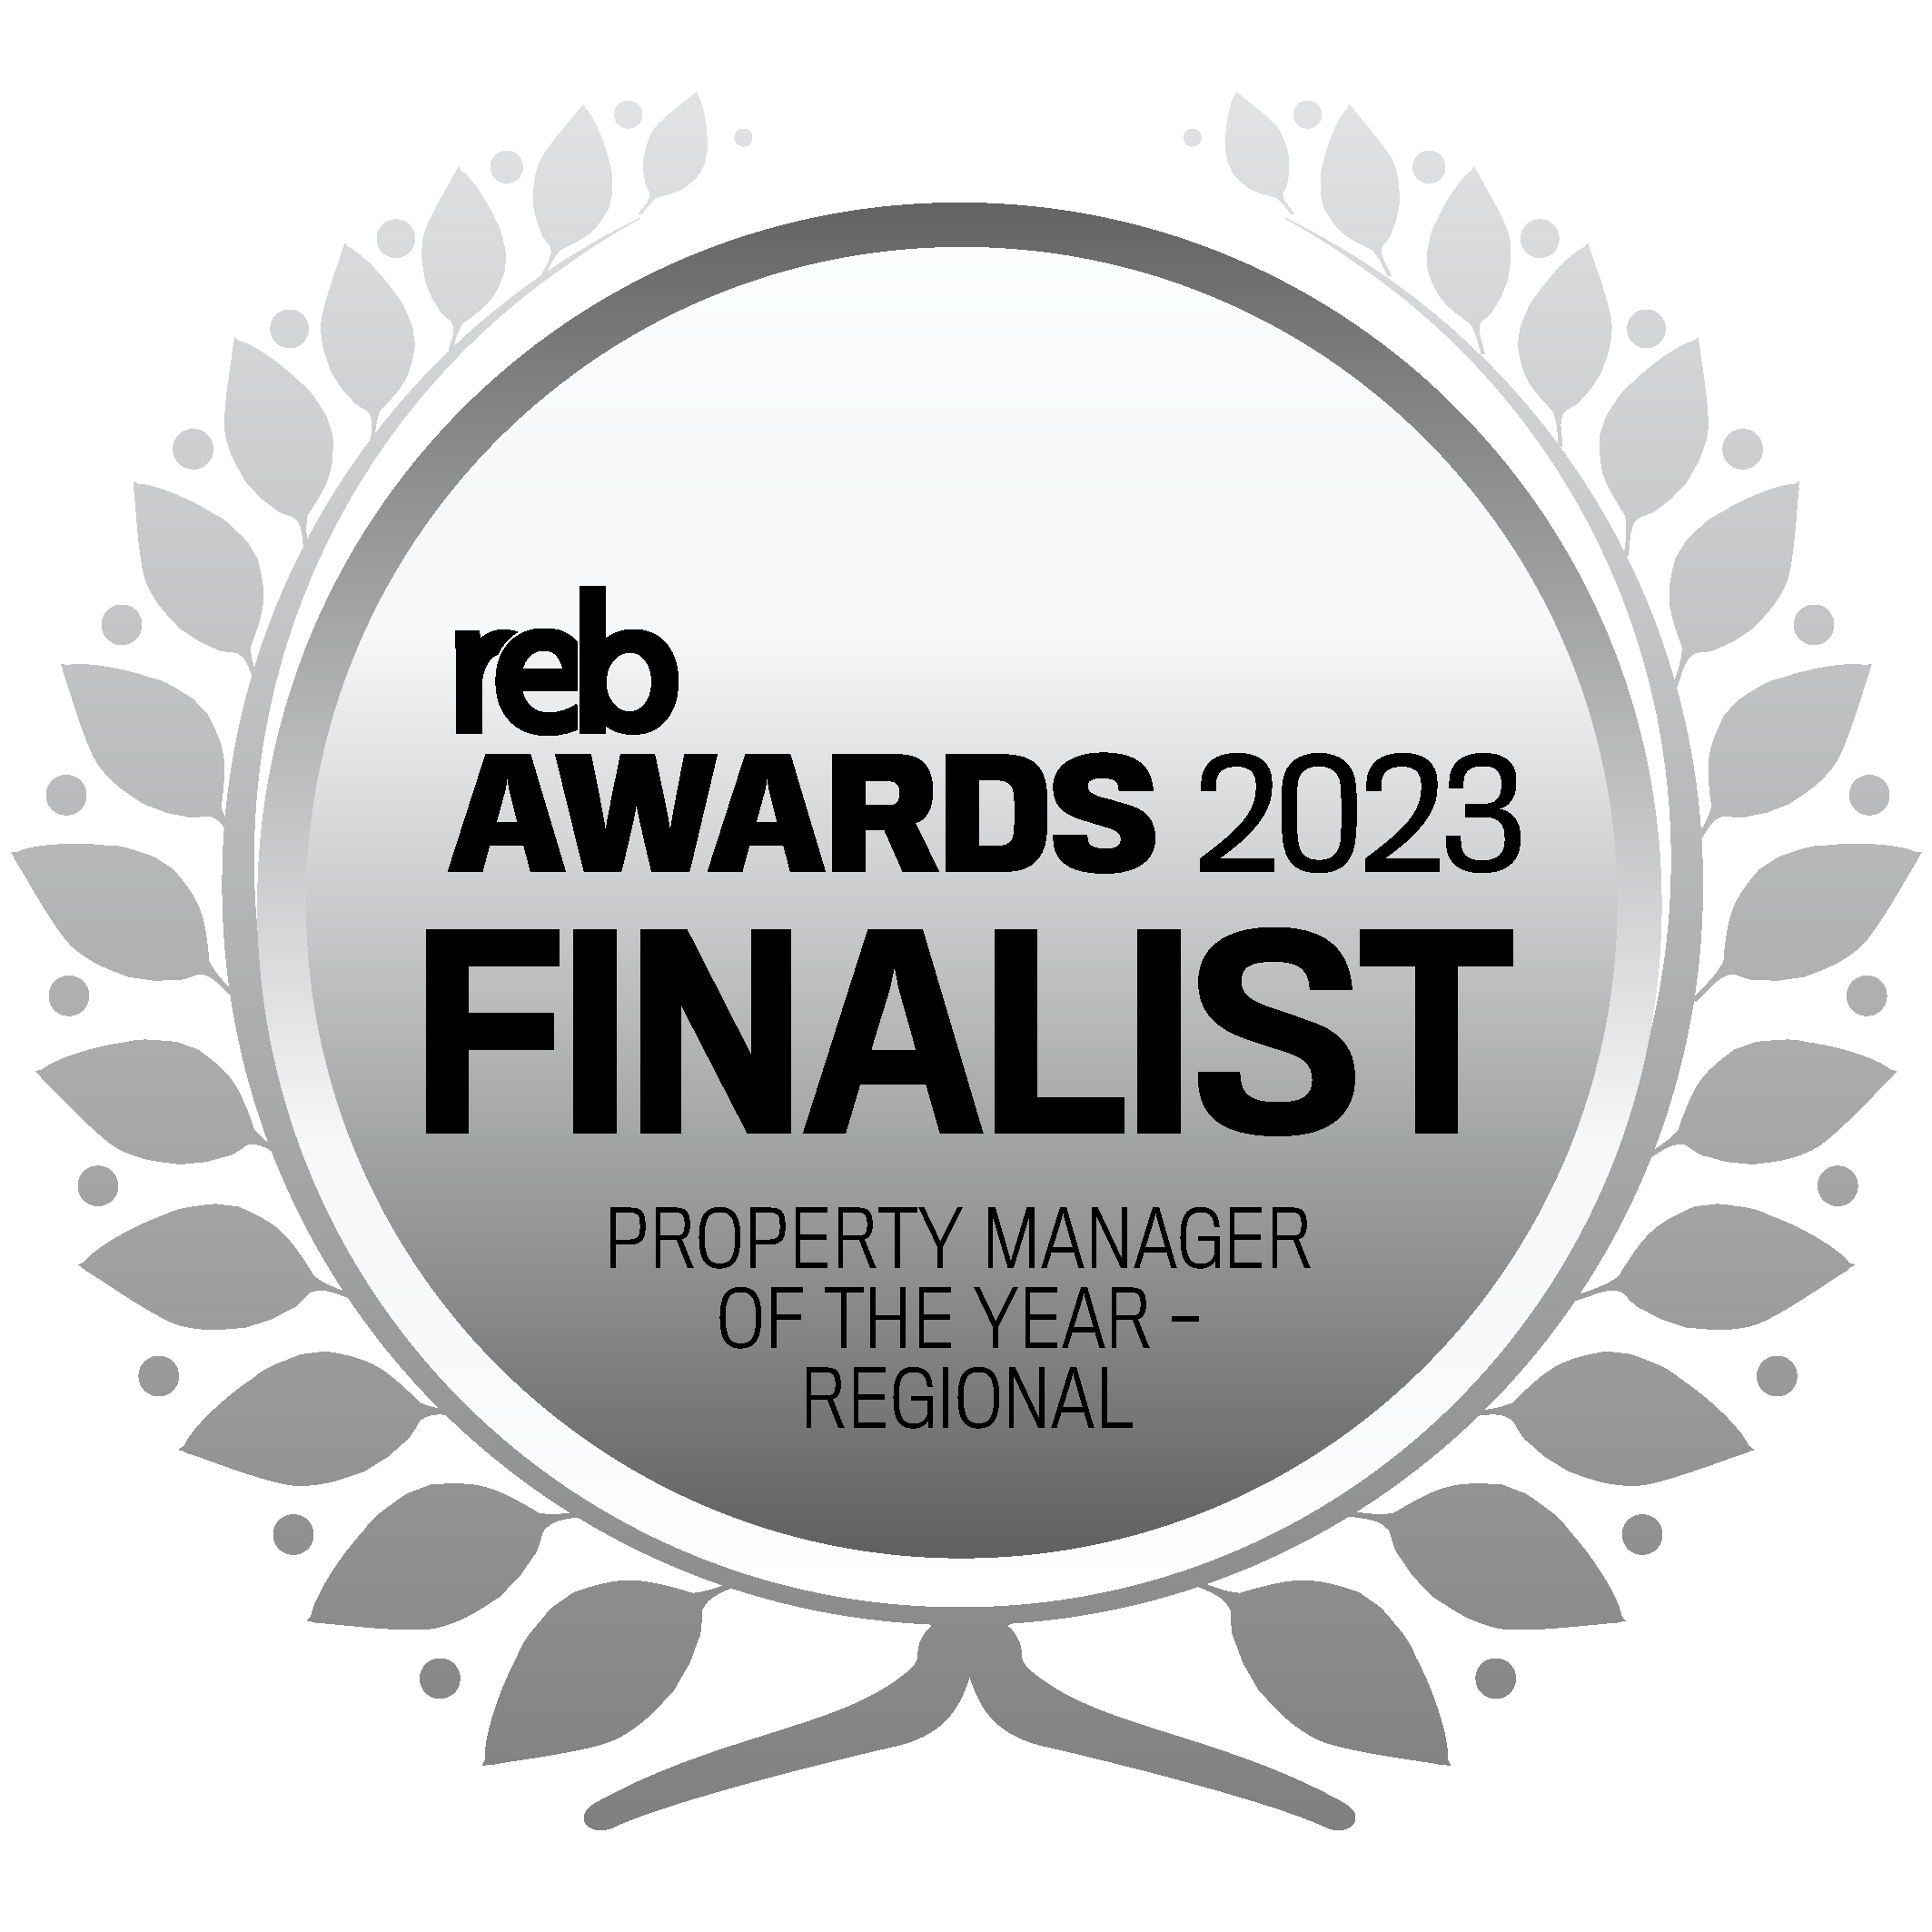 Reb2023 Finalists Seals Property Manager Of The Year Regional (1)